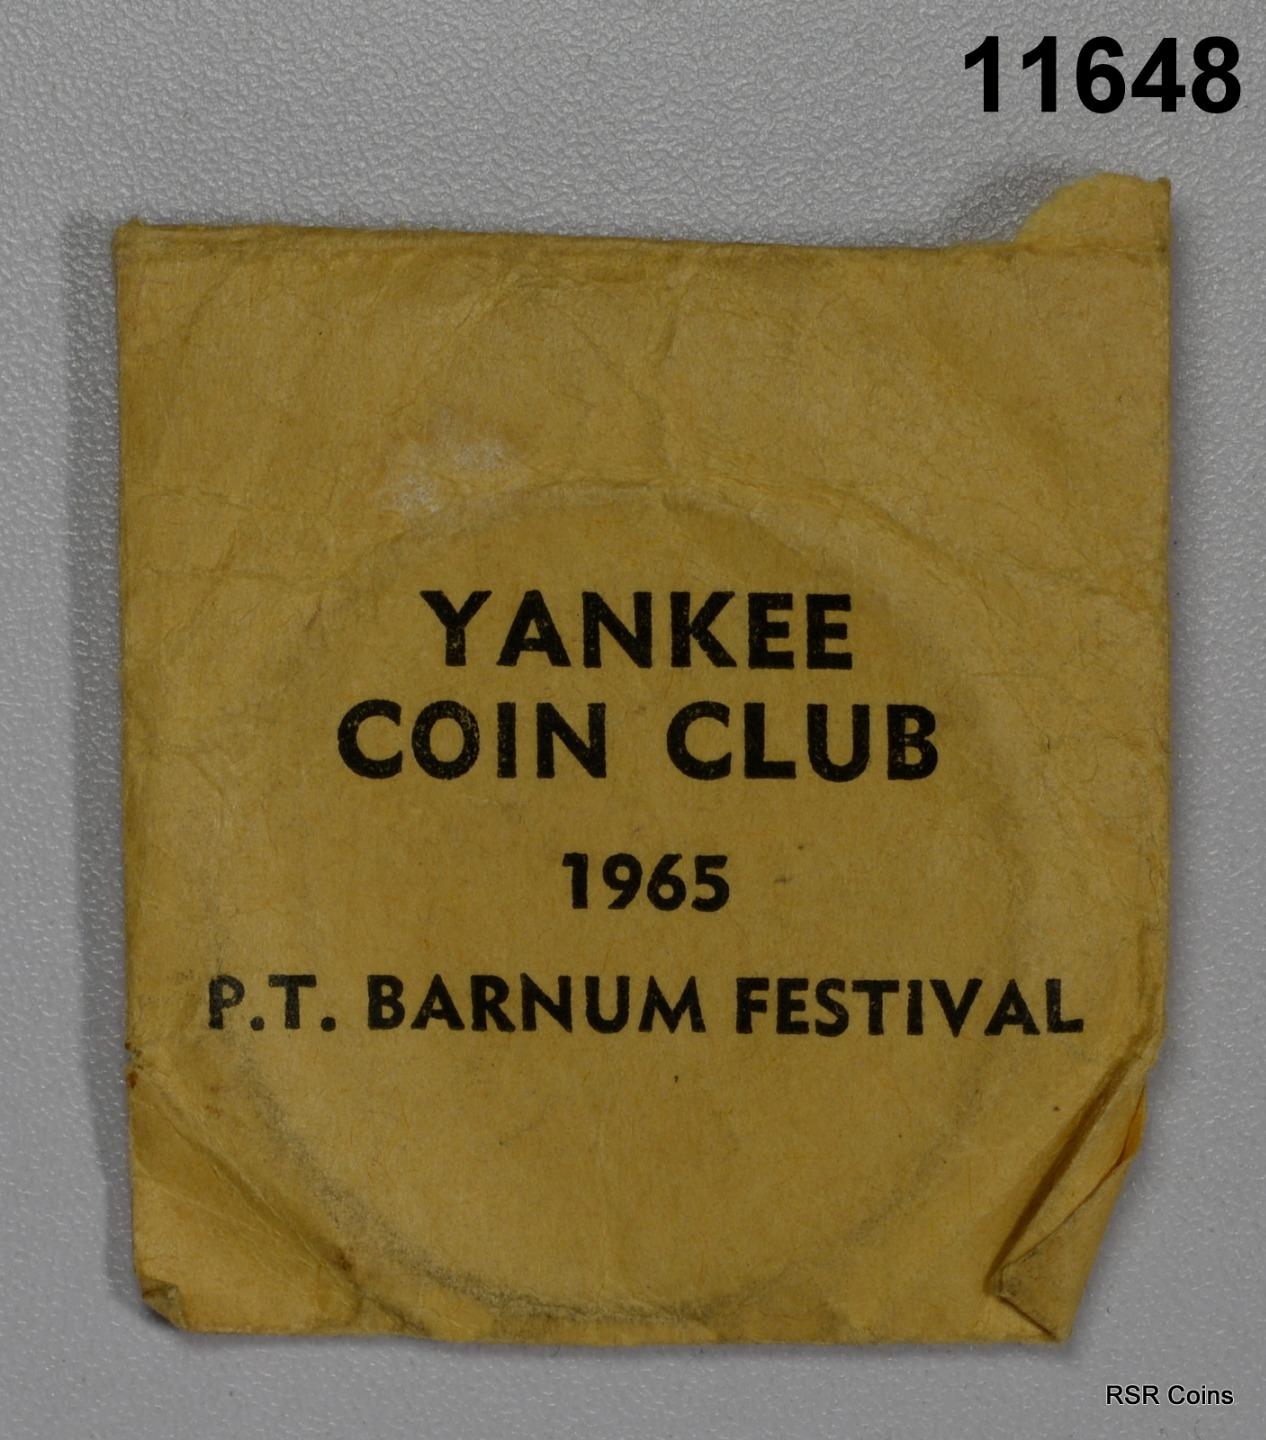 1965 P.T. BARNUM FESTIVAL BRIDGEPORT CT YANKEE COIN CLUB MEDAL WITH PAPER!#11648